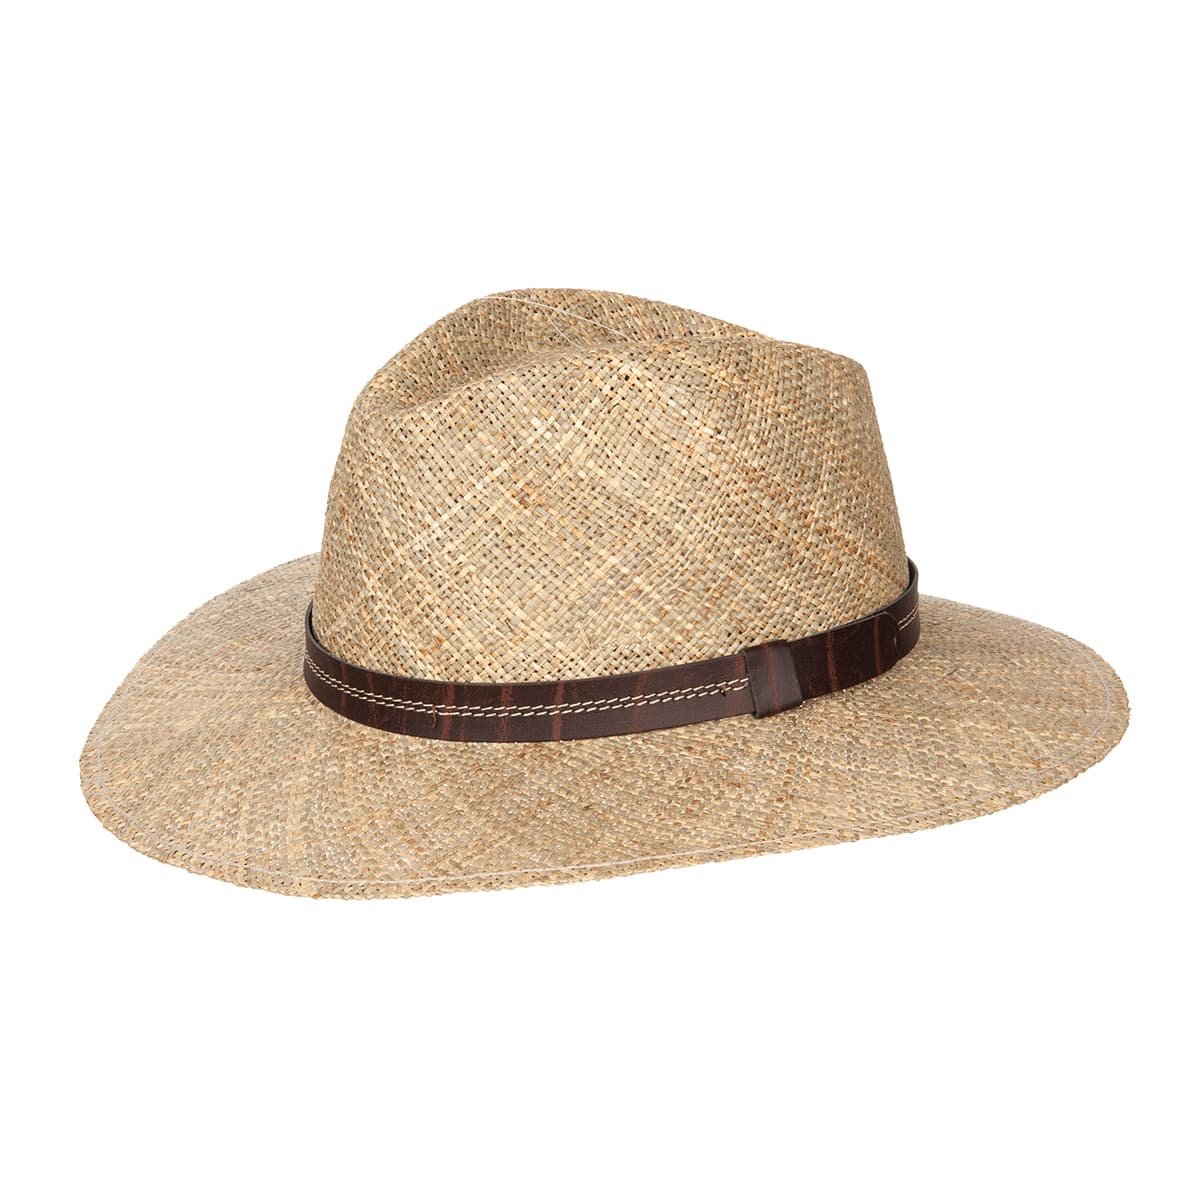 Mens Straw Hats | vlr.eng.br